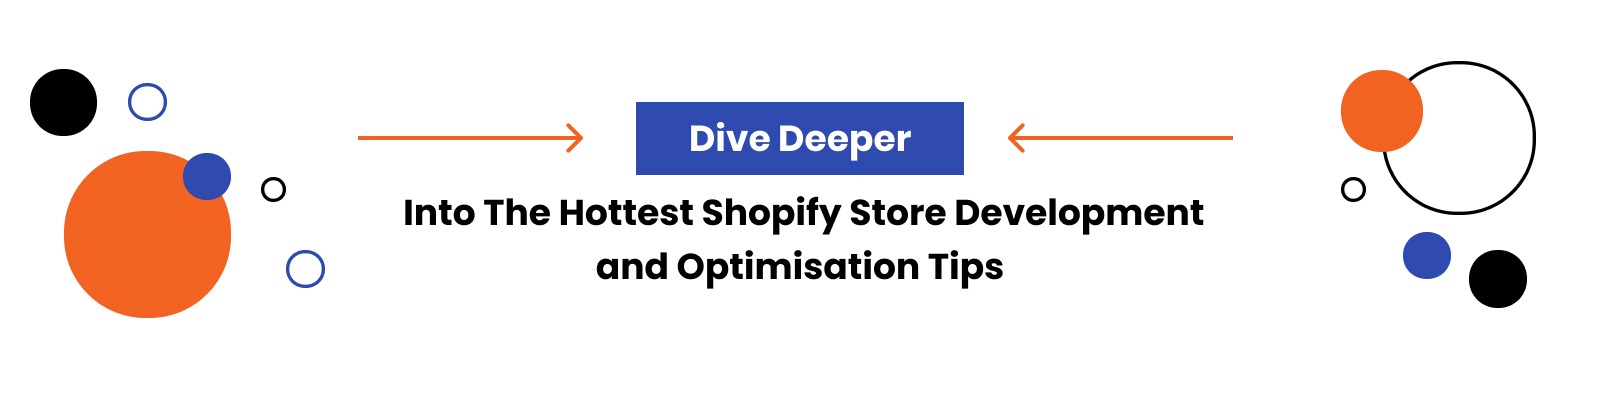 The Hottest Shopify Store Development and Optimisation Tips - Shopify Apps Developement